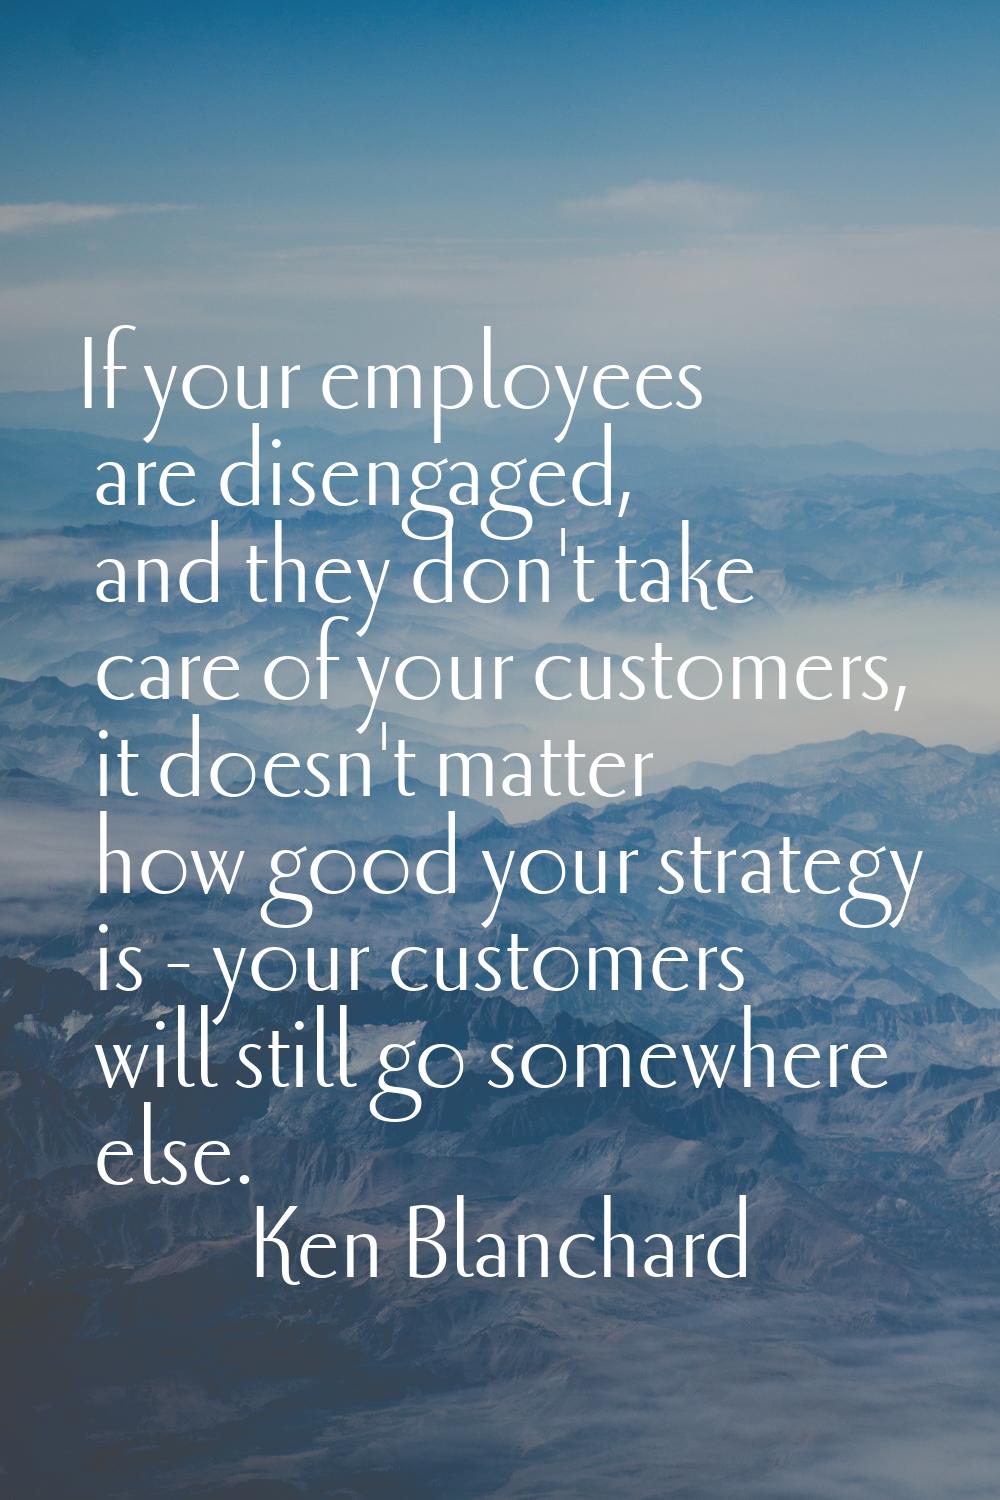 If your employees are disengaged, and they don't take care of your customers, it doesn't matter how